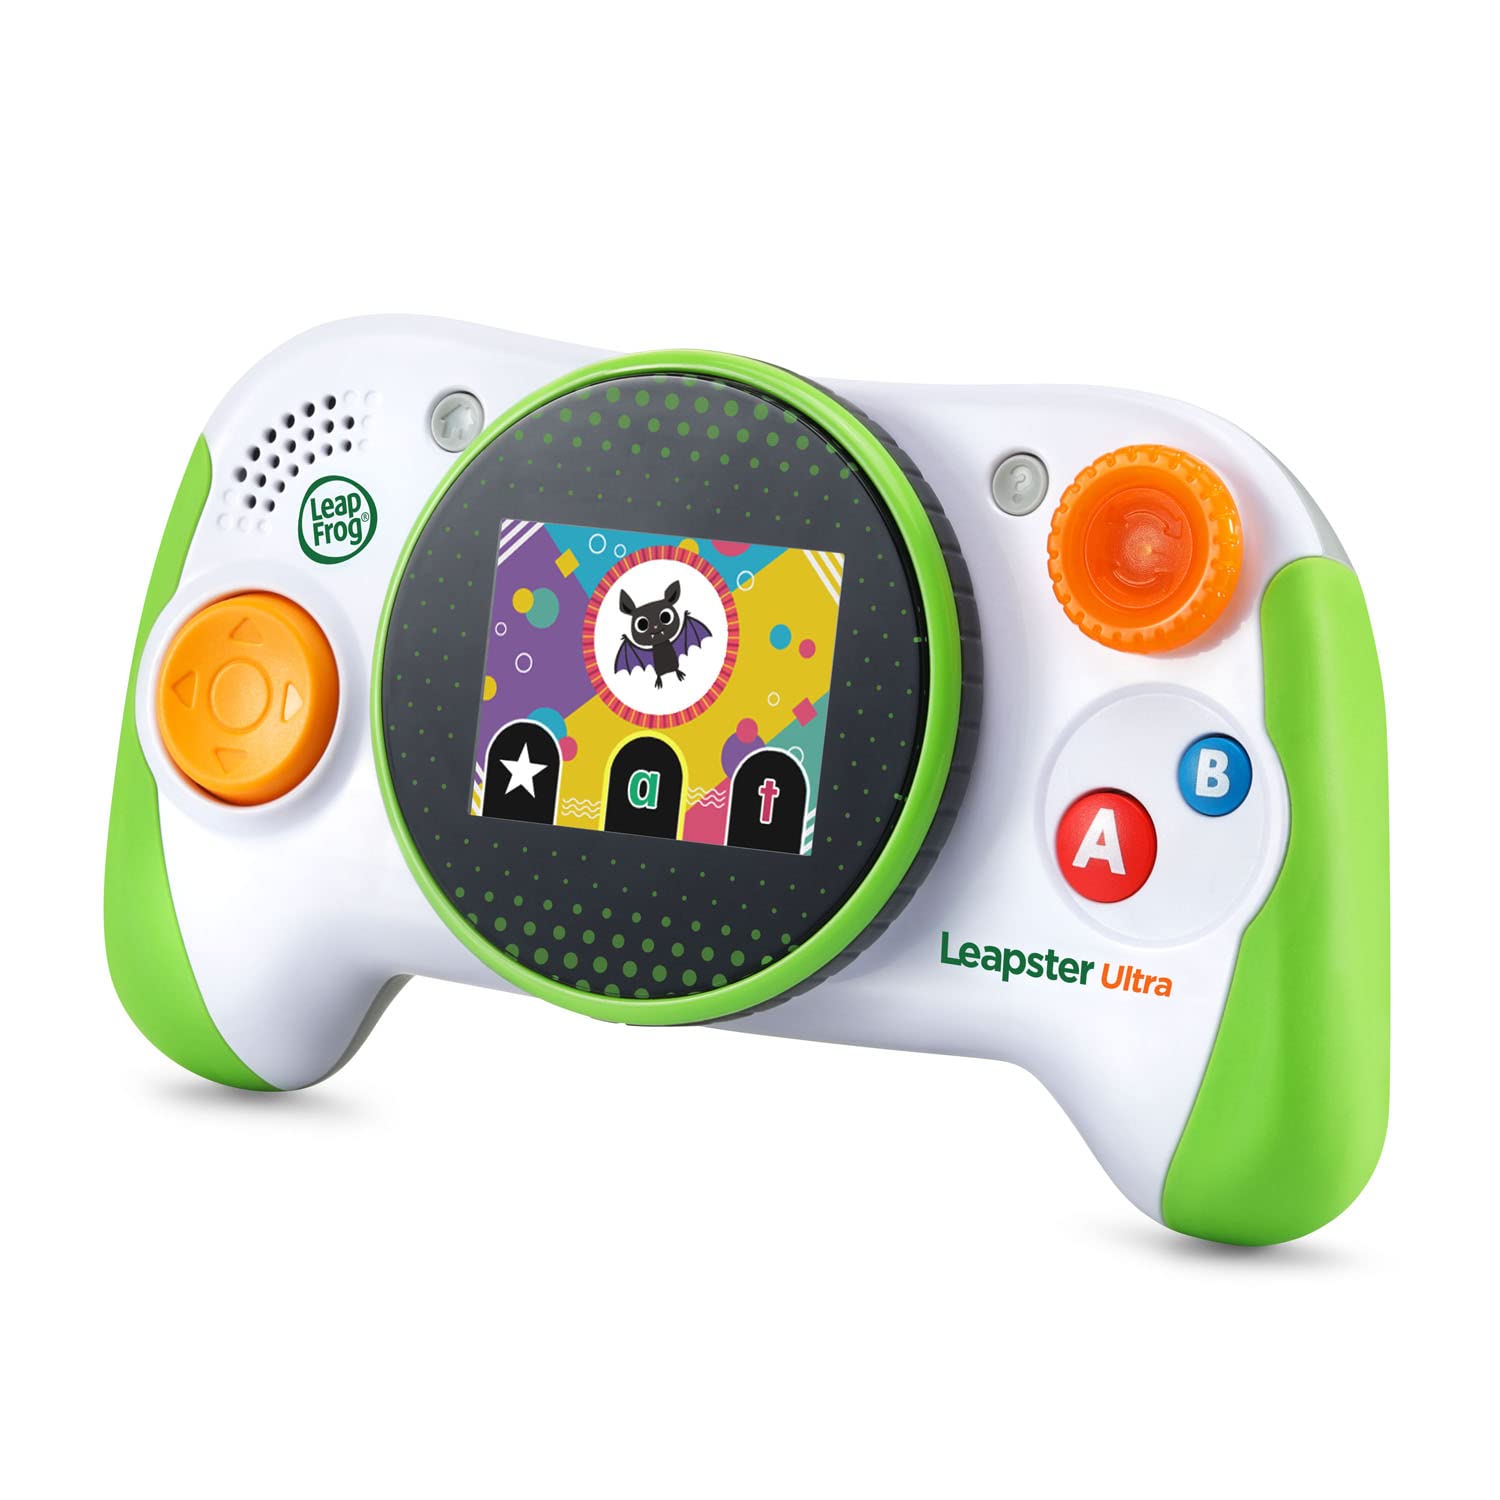 LeapFrog Leapster Ultra Handheld Learning Game Console for Kids Age 4 Years and up